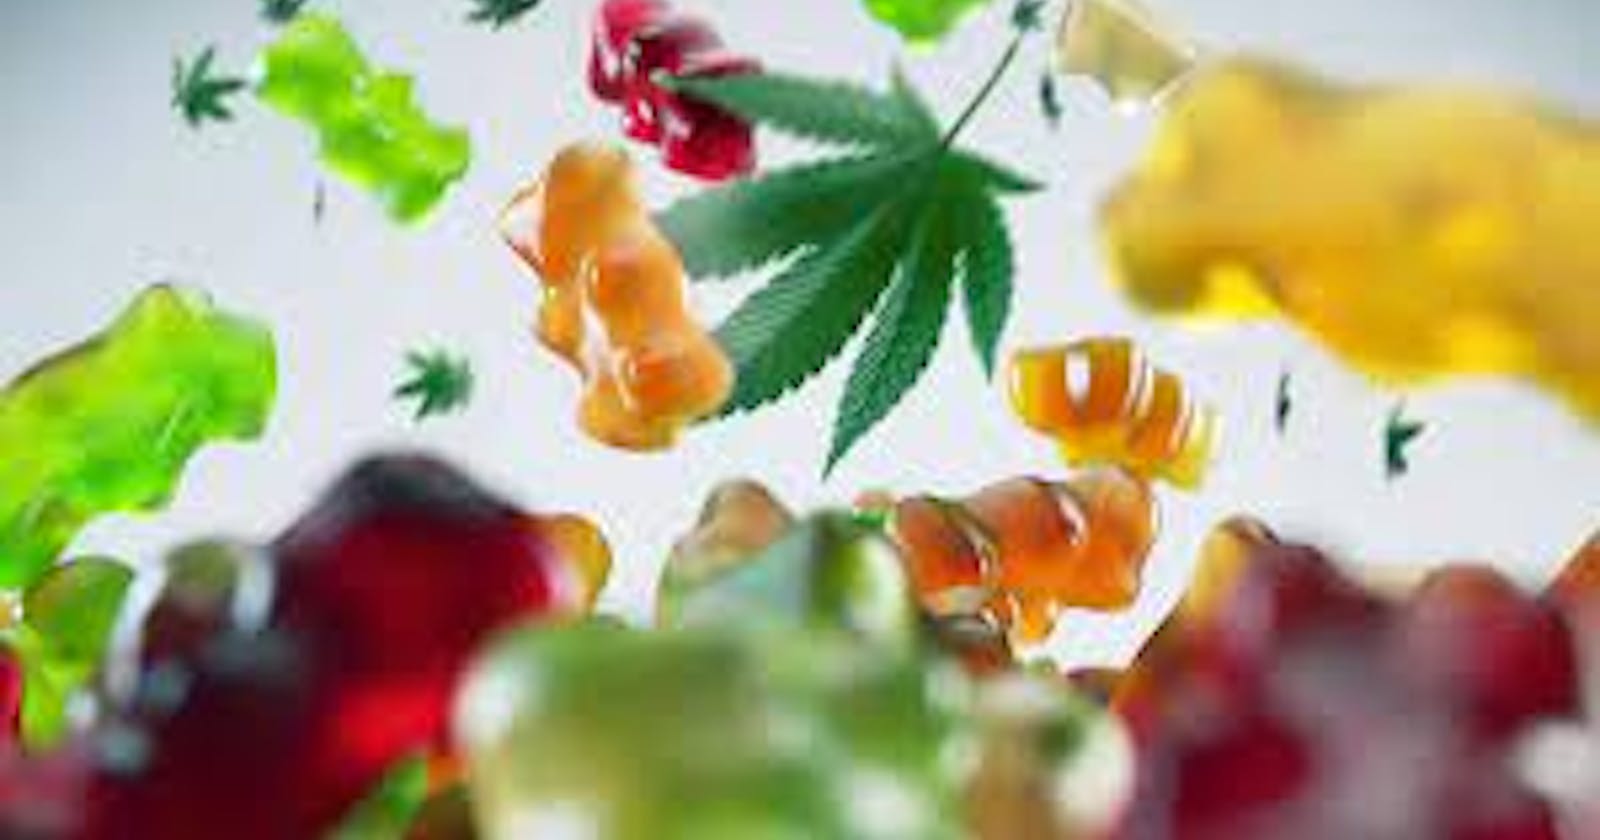 Canna Organic Green CBD Gummies Review: Scam or Legit? Serious Side Effects Risk?